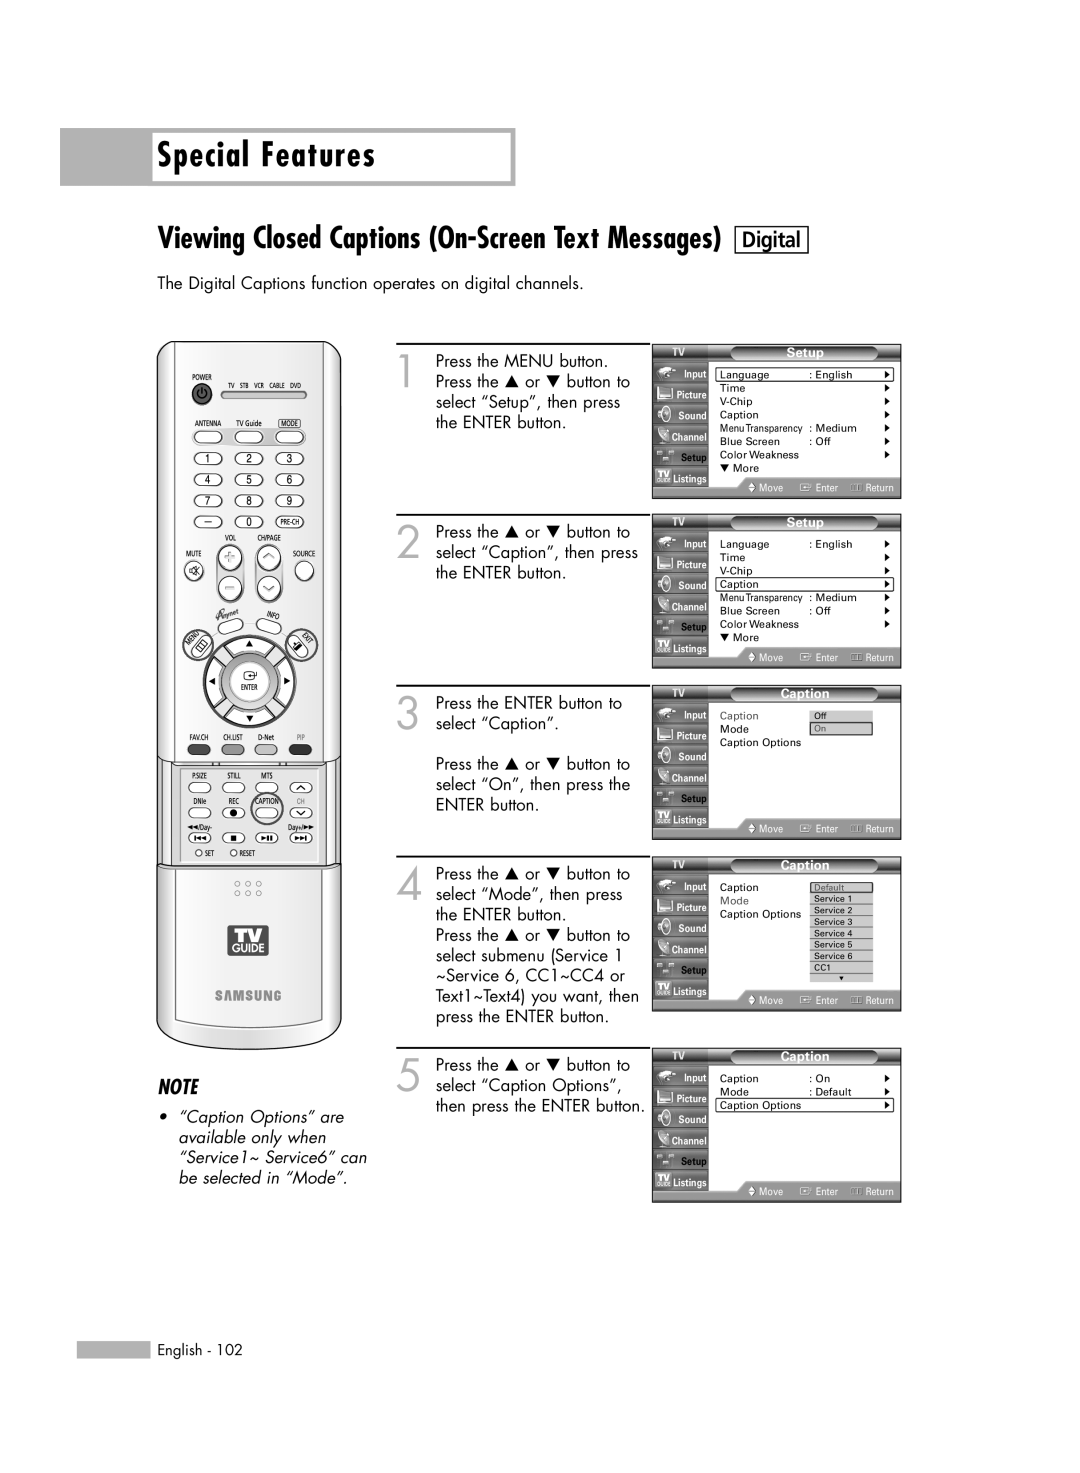 Samsung HL-R5688W manual Special Features, Viewing Closed Captions On-Screen Text Messages, Digital, Default On 